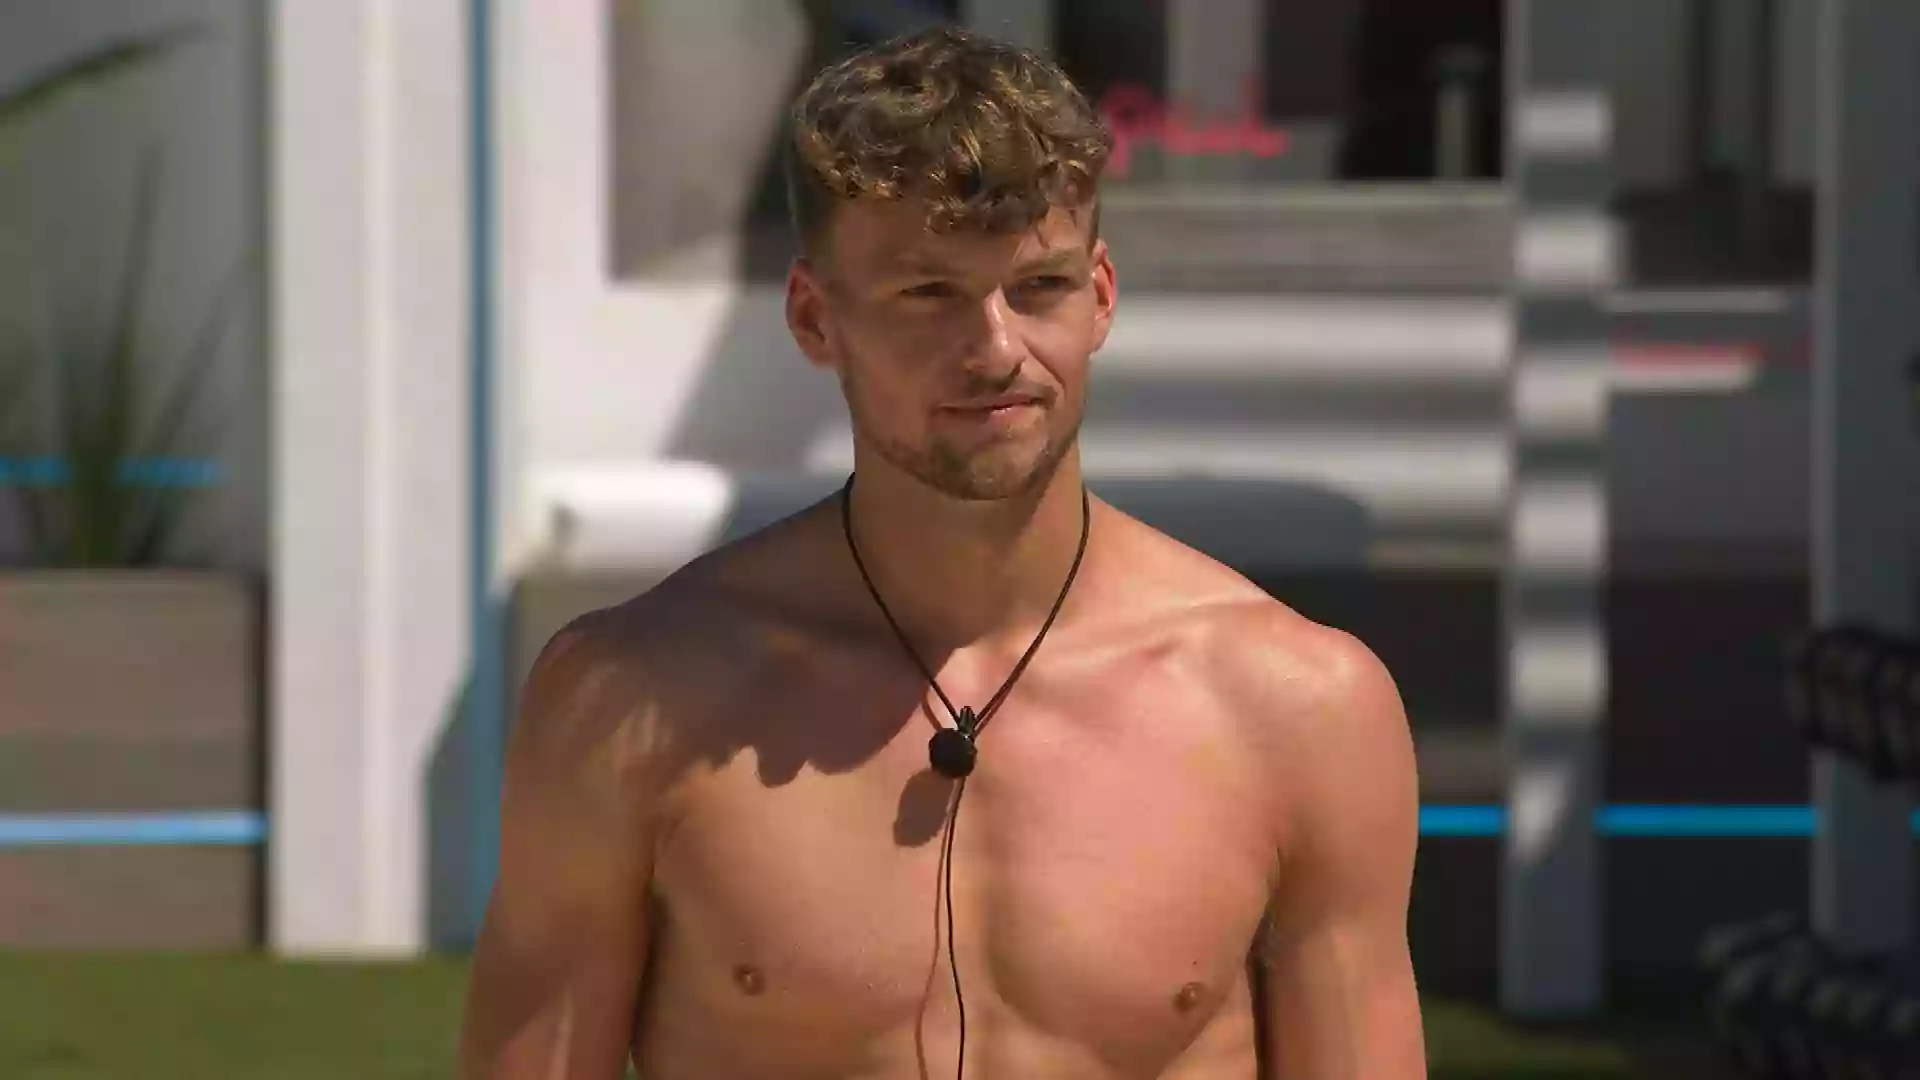 Hugo goes on a recoupling rant on Love Island, resulting in intense scenes